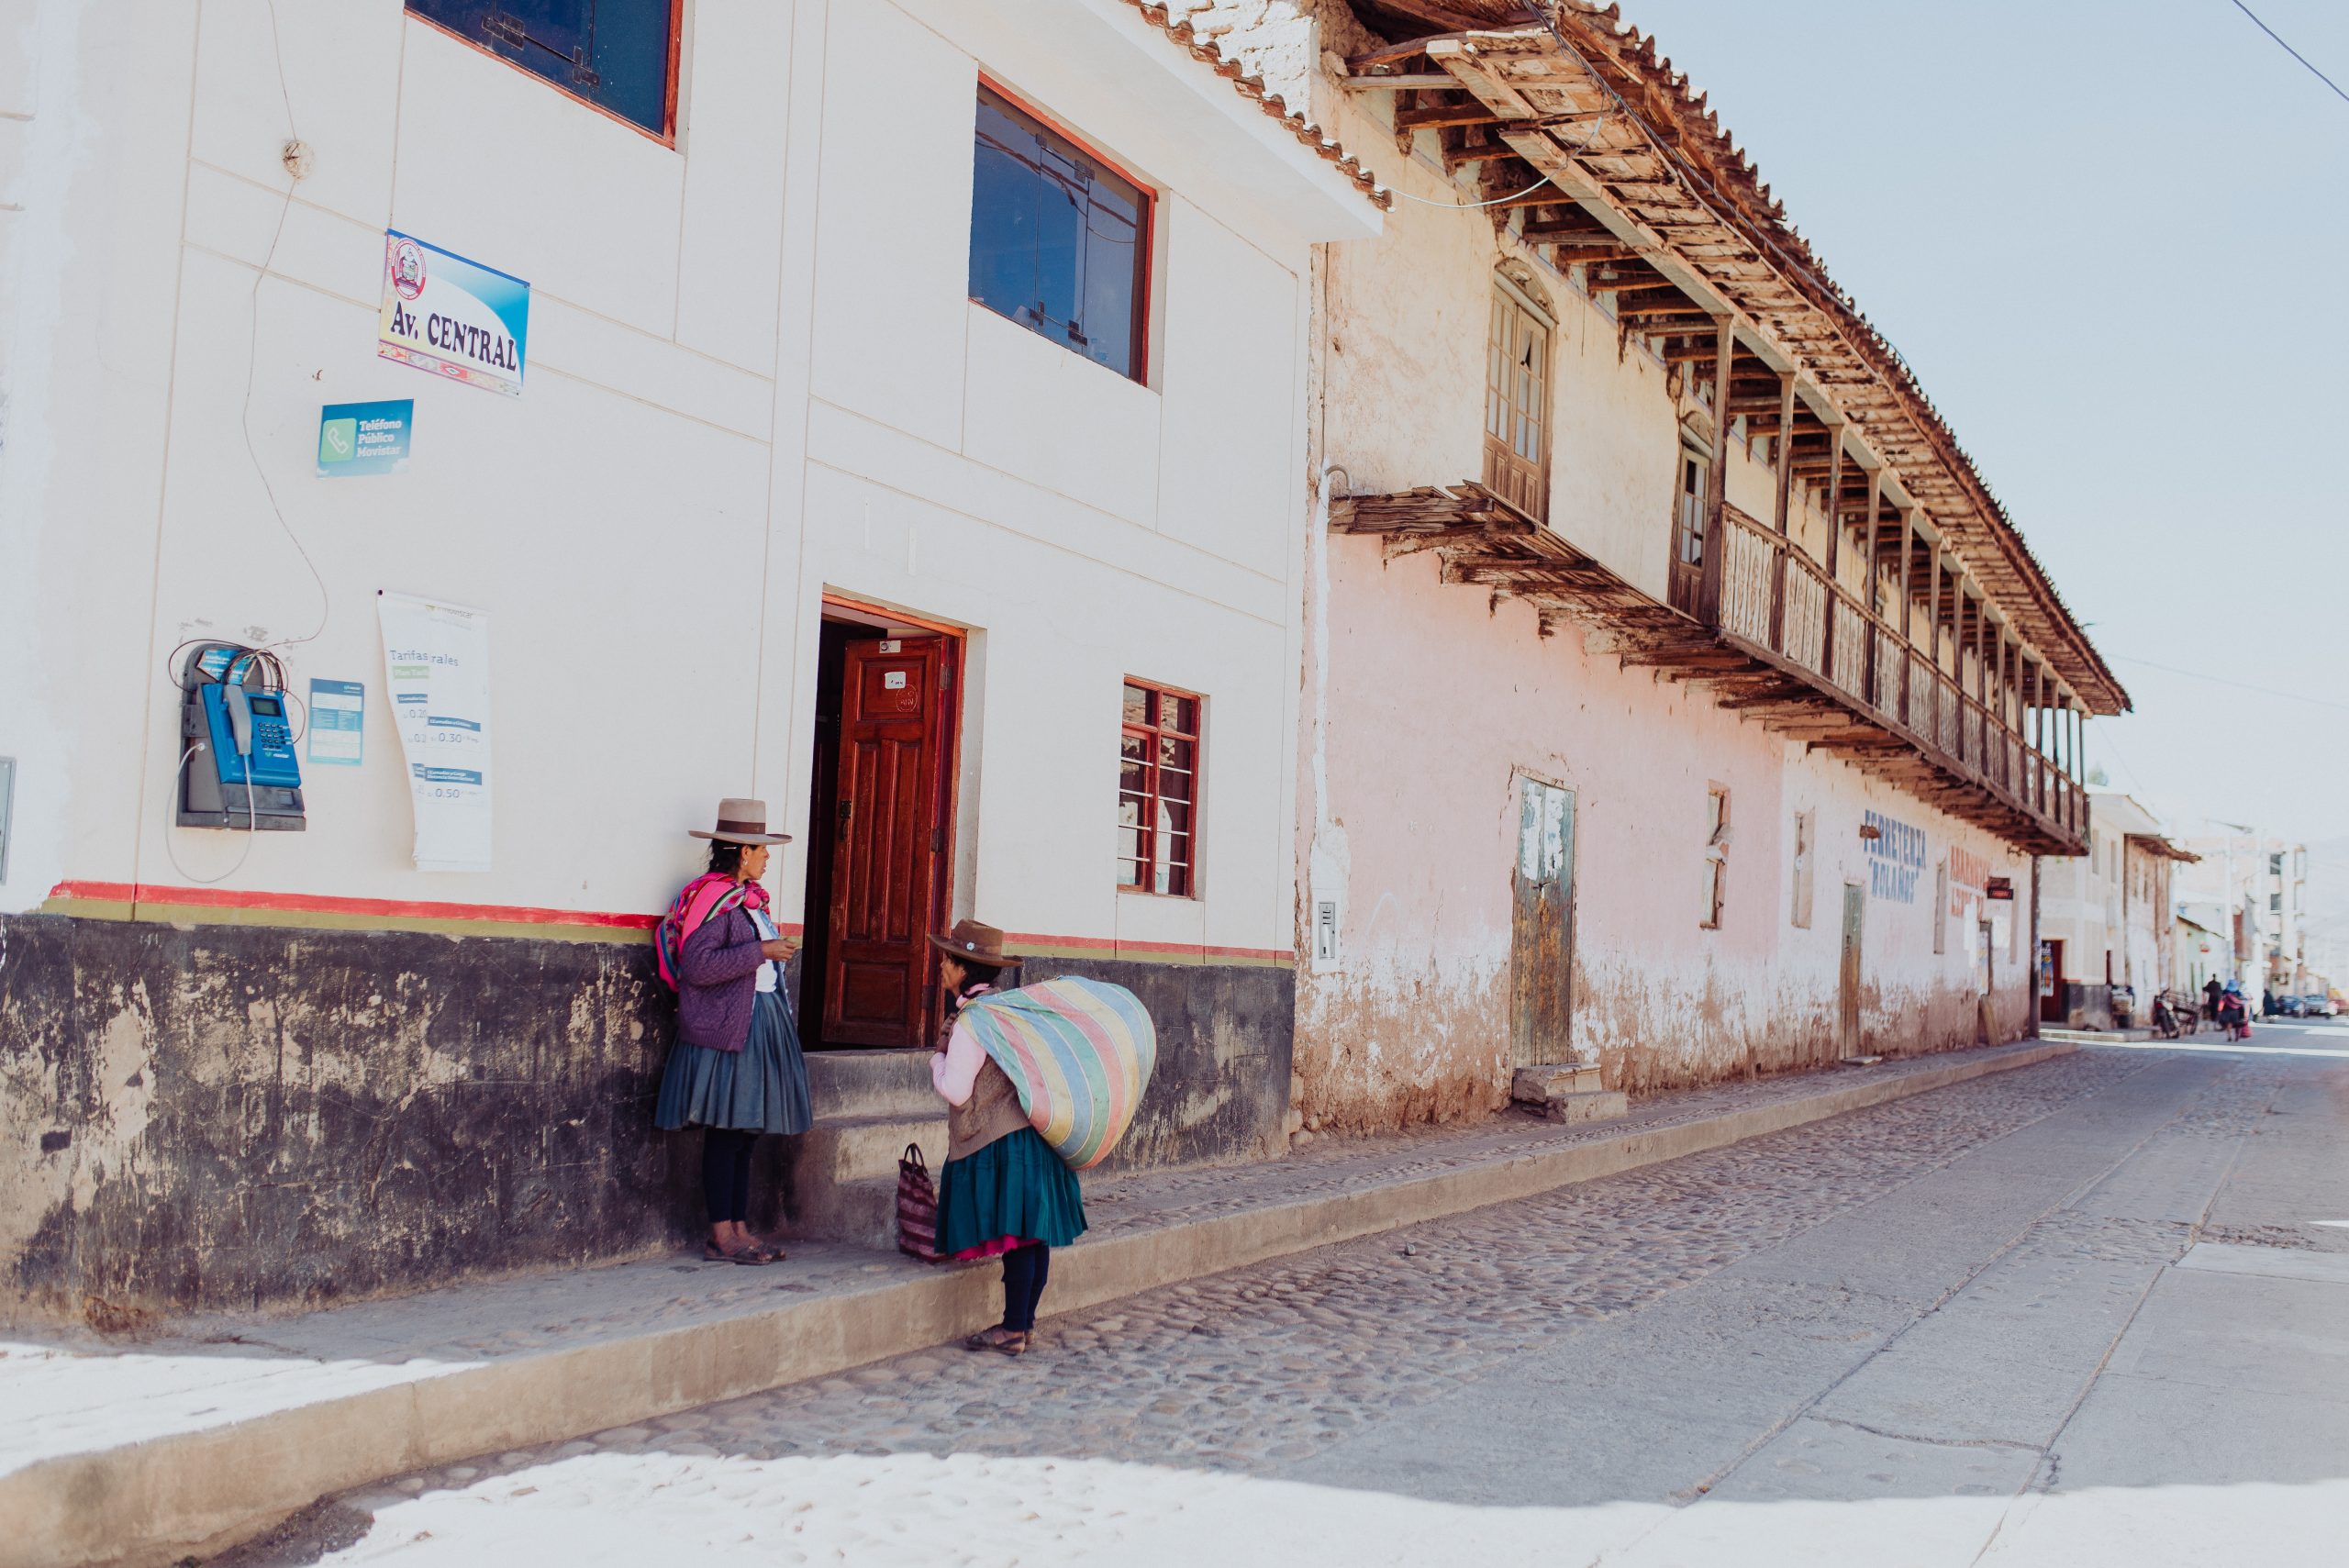 Two women of the Andes region of Peru meeting on a street, holding large bags on their back.